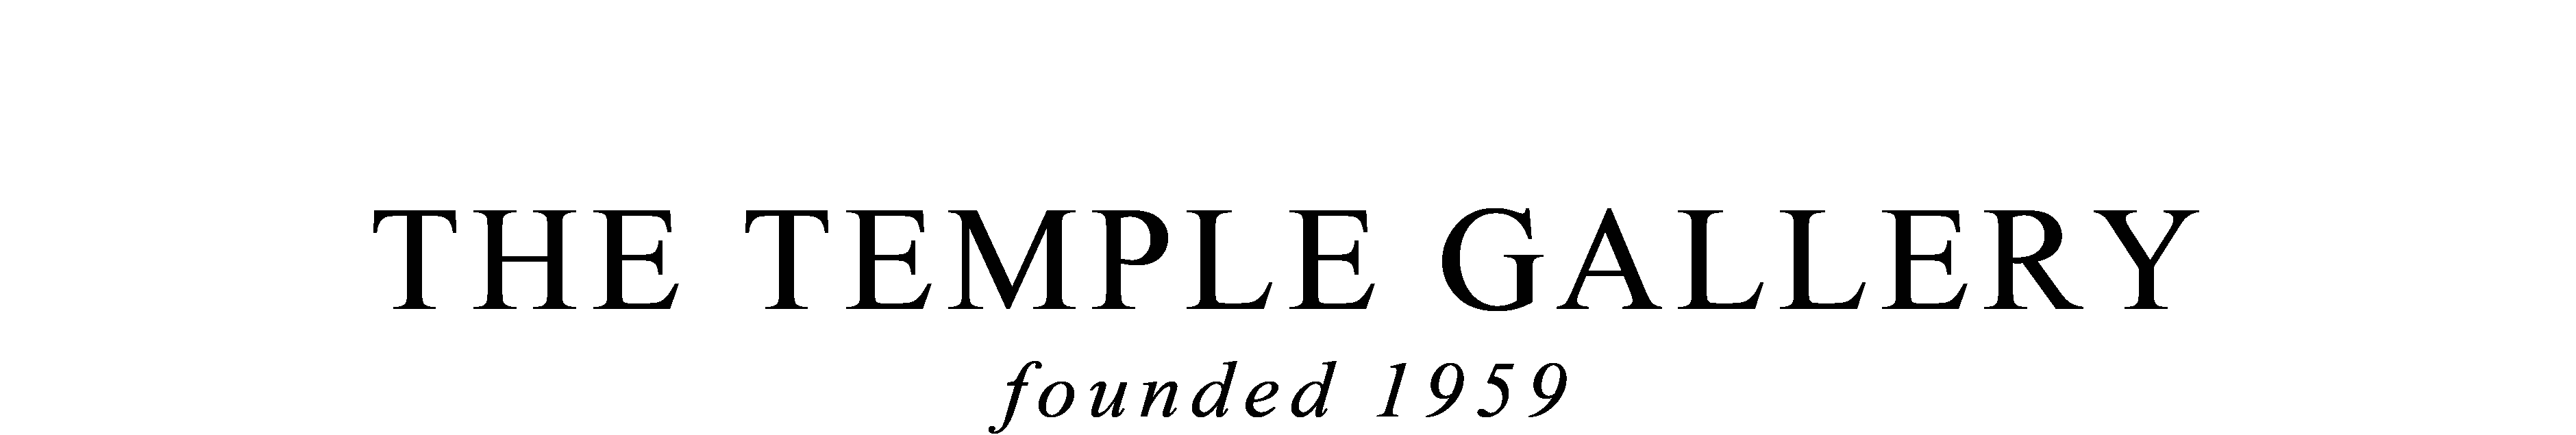 The Temple Gallery company logo